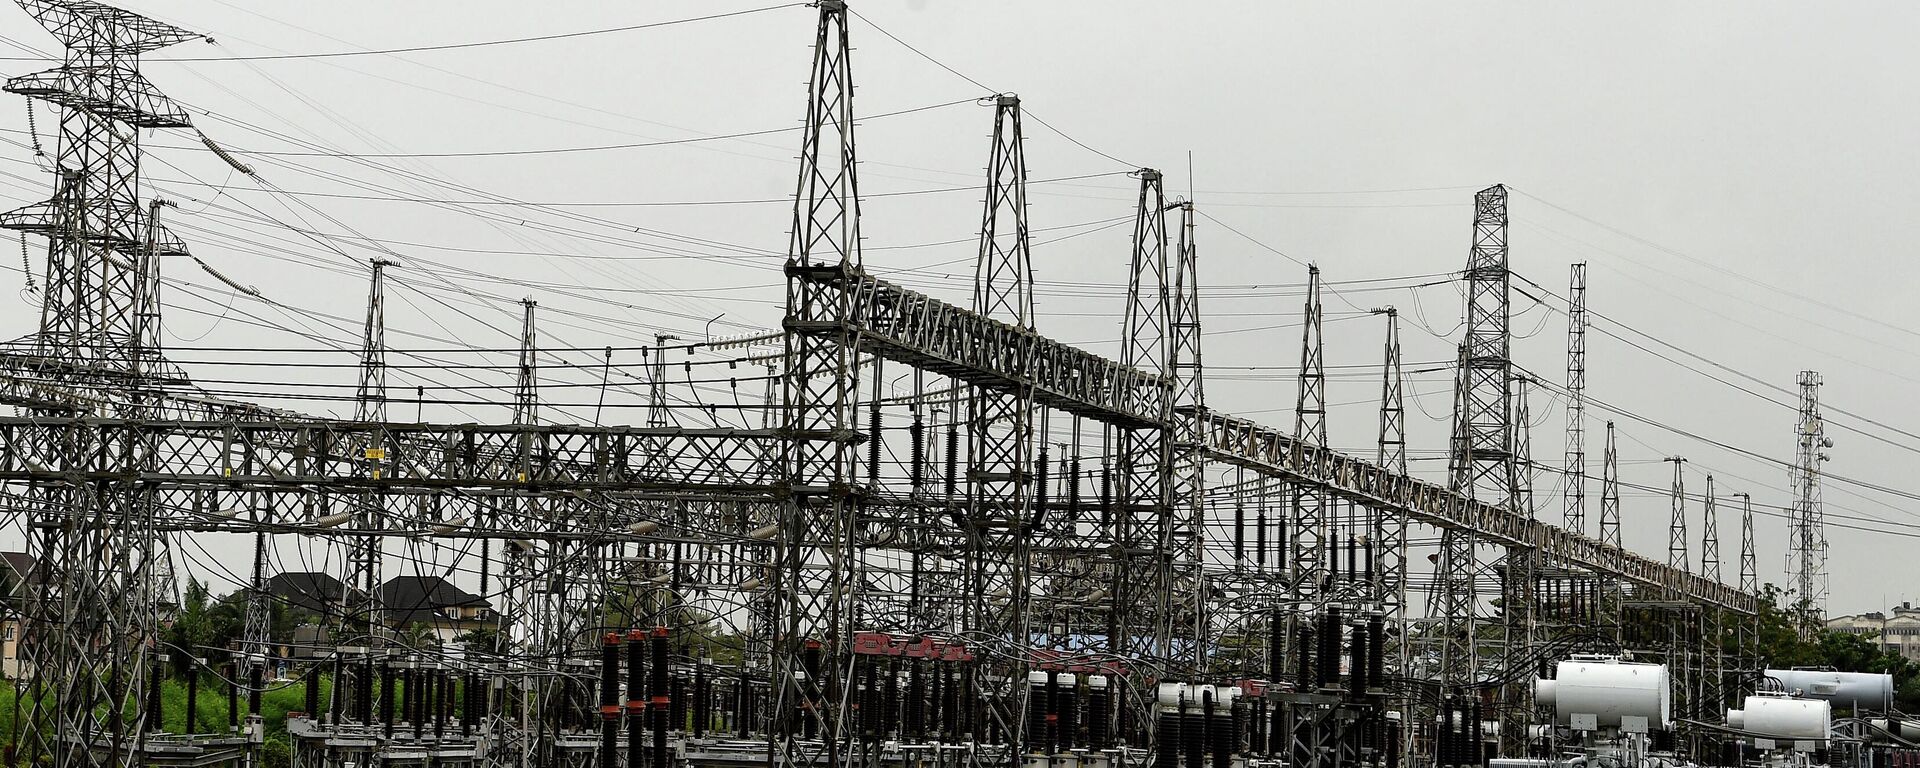 A general view of a power distribution plant which has ran out of power supply following a collapse of the national grid resulting in total blackout in Lagos, Nigeria's commercial capital, on March 15, 2022. - From Nigerian airlines to Malawi bakers, African countries are feeling the pain of Ukraine's crisis as supply disruptions hike inflation and oil prices push up fuel costs.
Global oil prices touched ten-year highs of more than $100 a barrel soon after Russia invaded Ukraine, doubling diesel prices for African countries like Nigeria.
Ukraine and Russia are both major suppliers of wheat and grains to Africa and Western sanctions and disruptions are already hiking costs across the continent. (Photo by PIUS UTOMI EKPEI / AFP) - Sputnik International, 1920, 27.09.2022